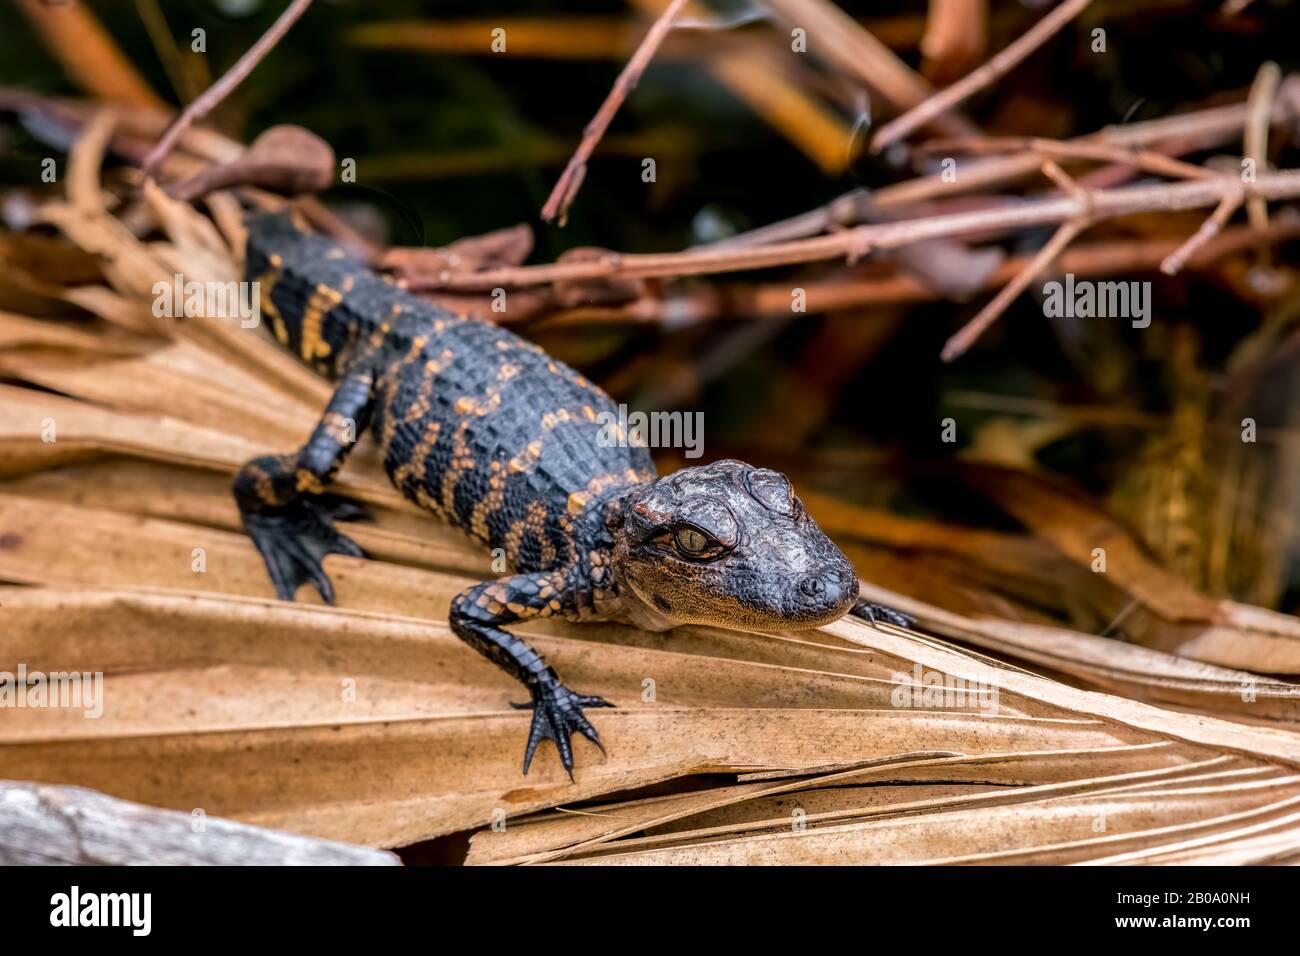 A young American alligator (Alligator mississippiensis) hatchling on a dried palm frond in Florida, USA. Stock Photo